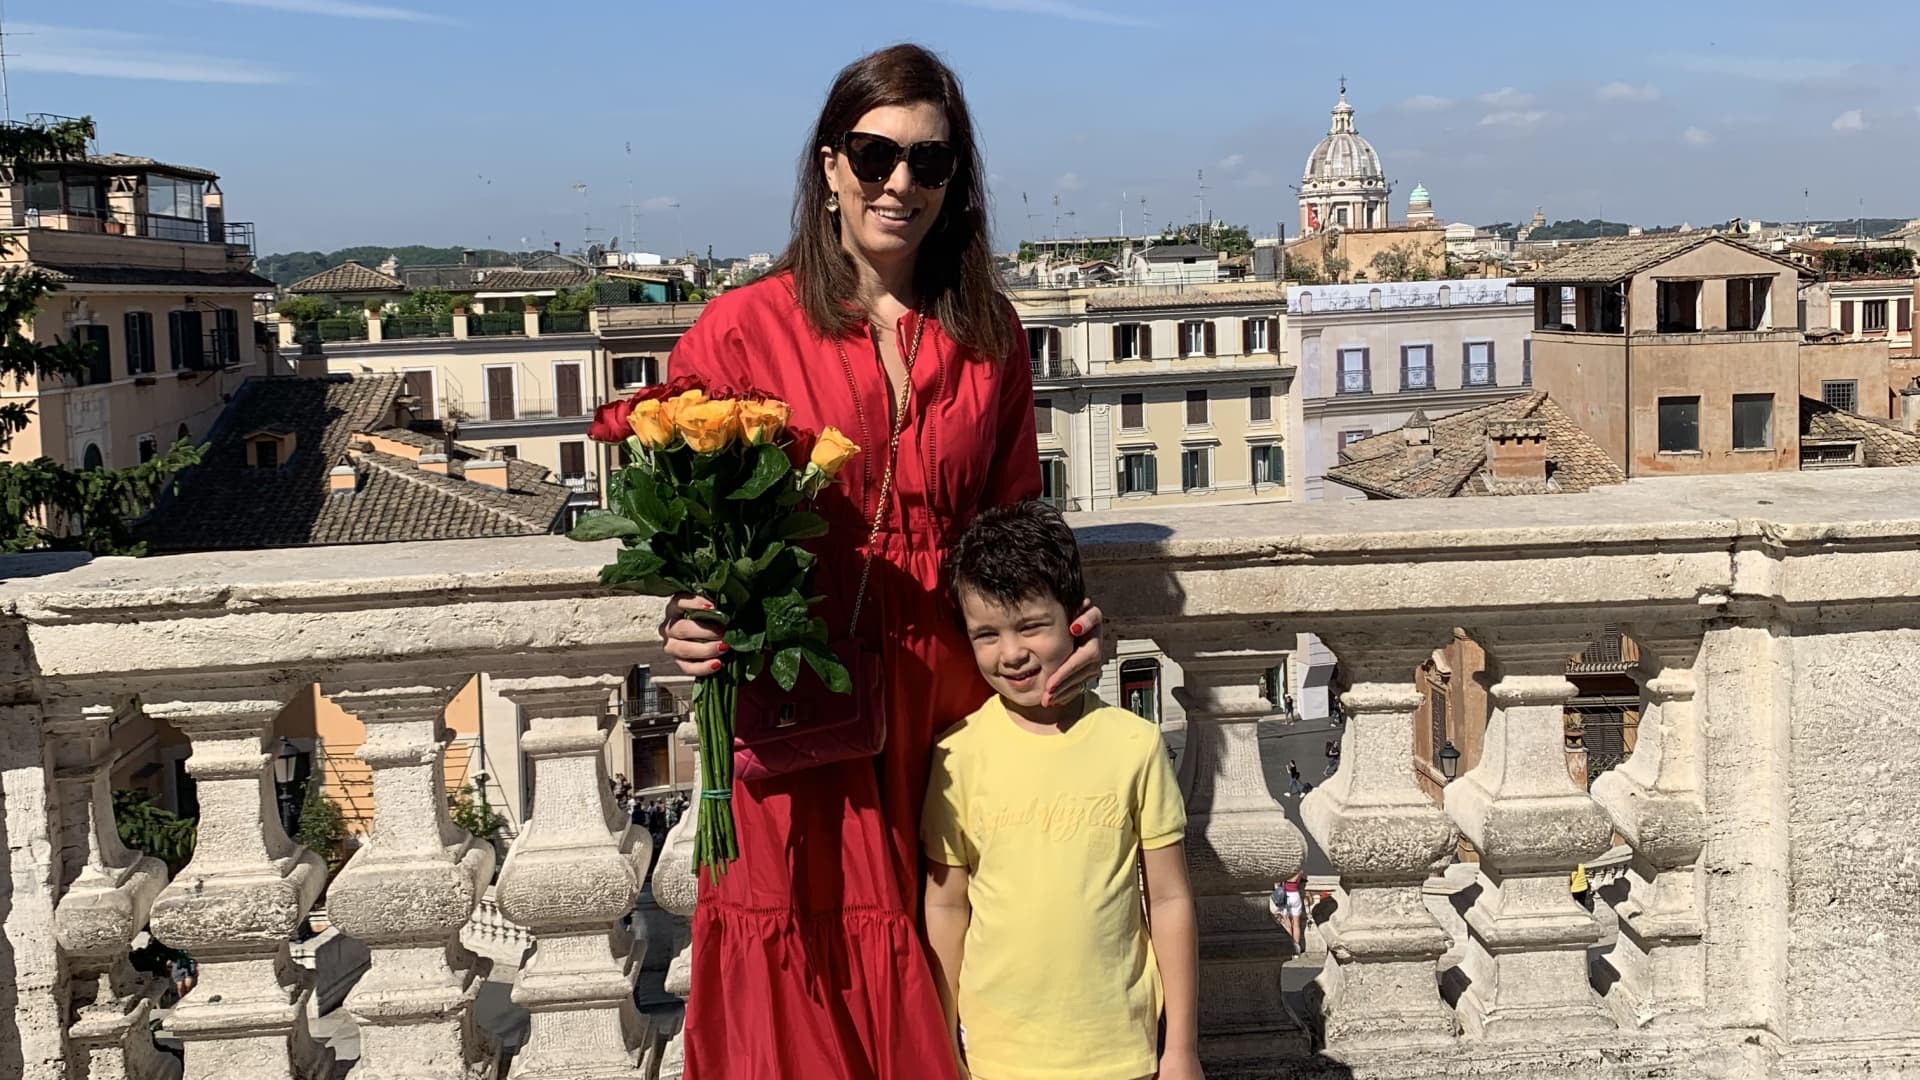 Serbian Sonja Prokopec and her son, Laith, on their trip to Rome.